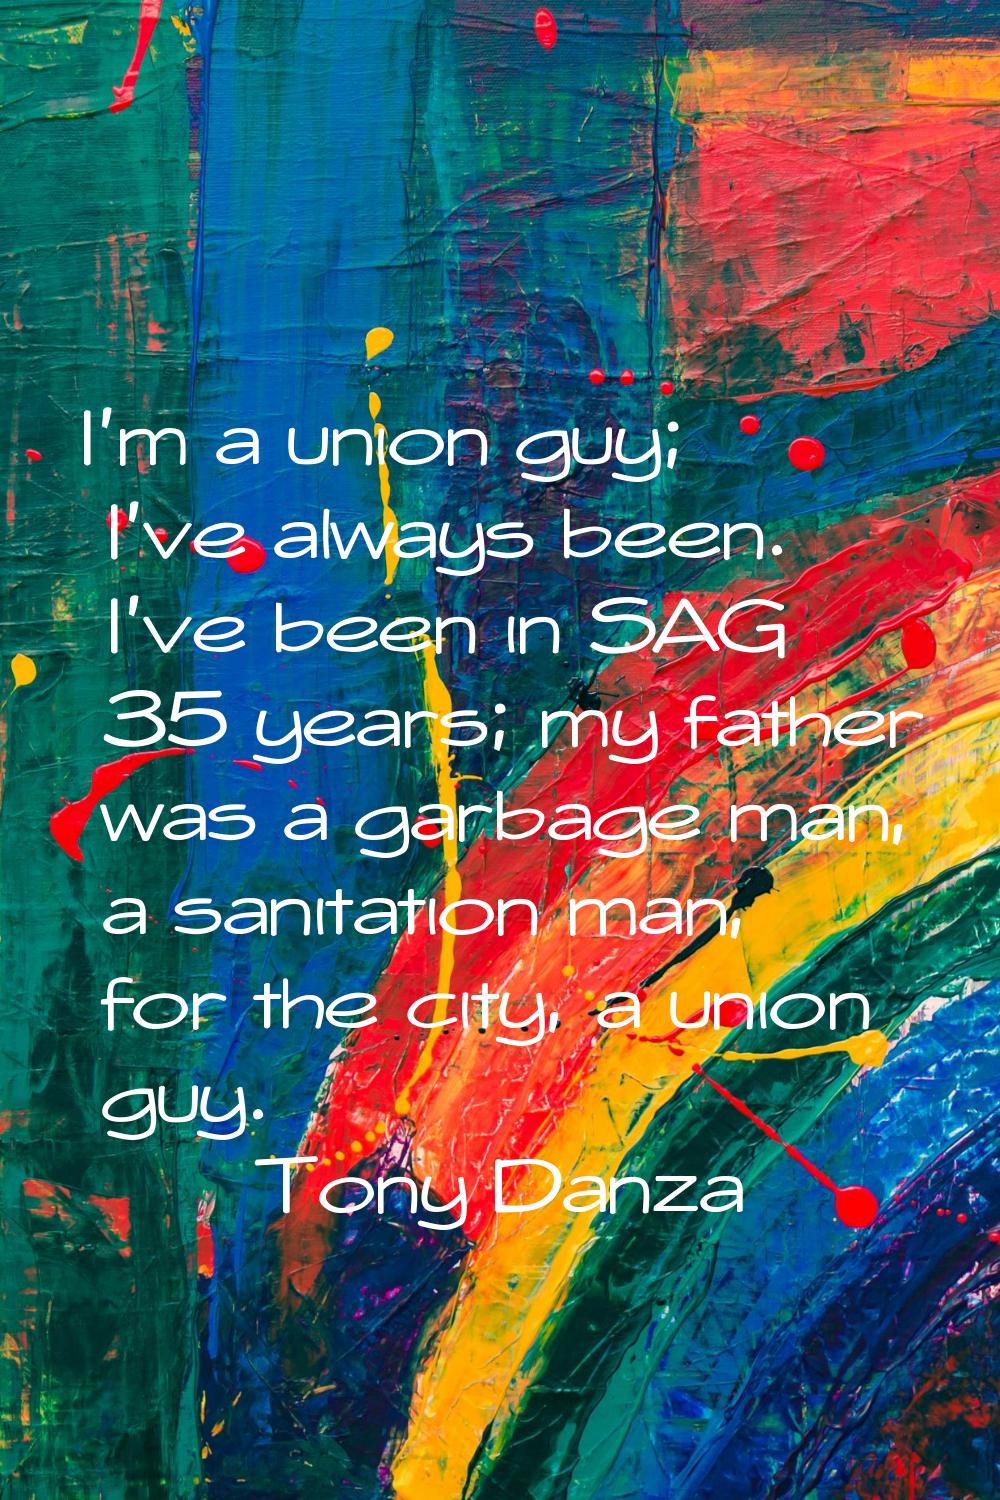 I'm a union guy; I've always been. I've been in SAG 35 years; my father was a garbage man, a sanita